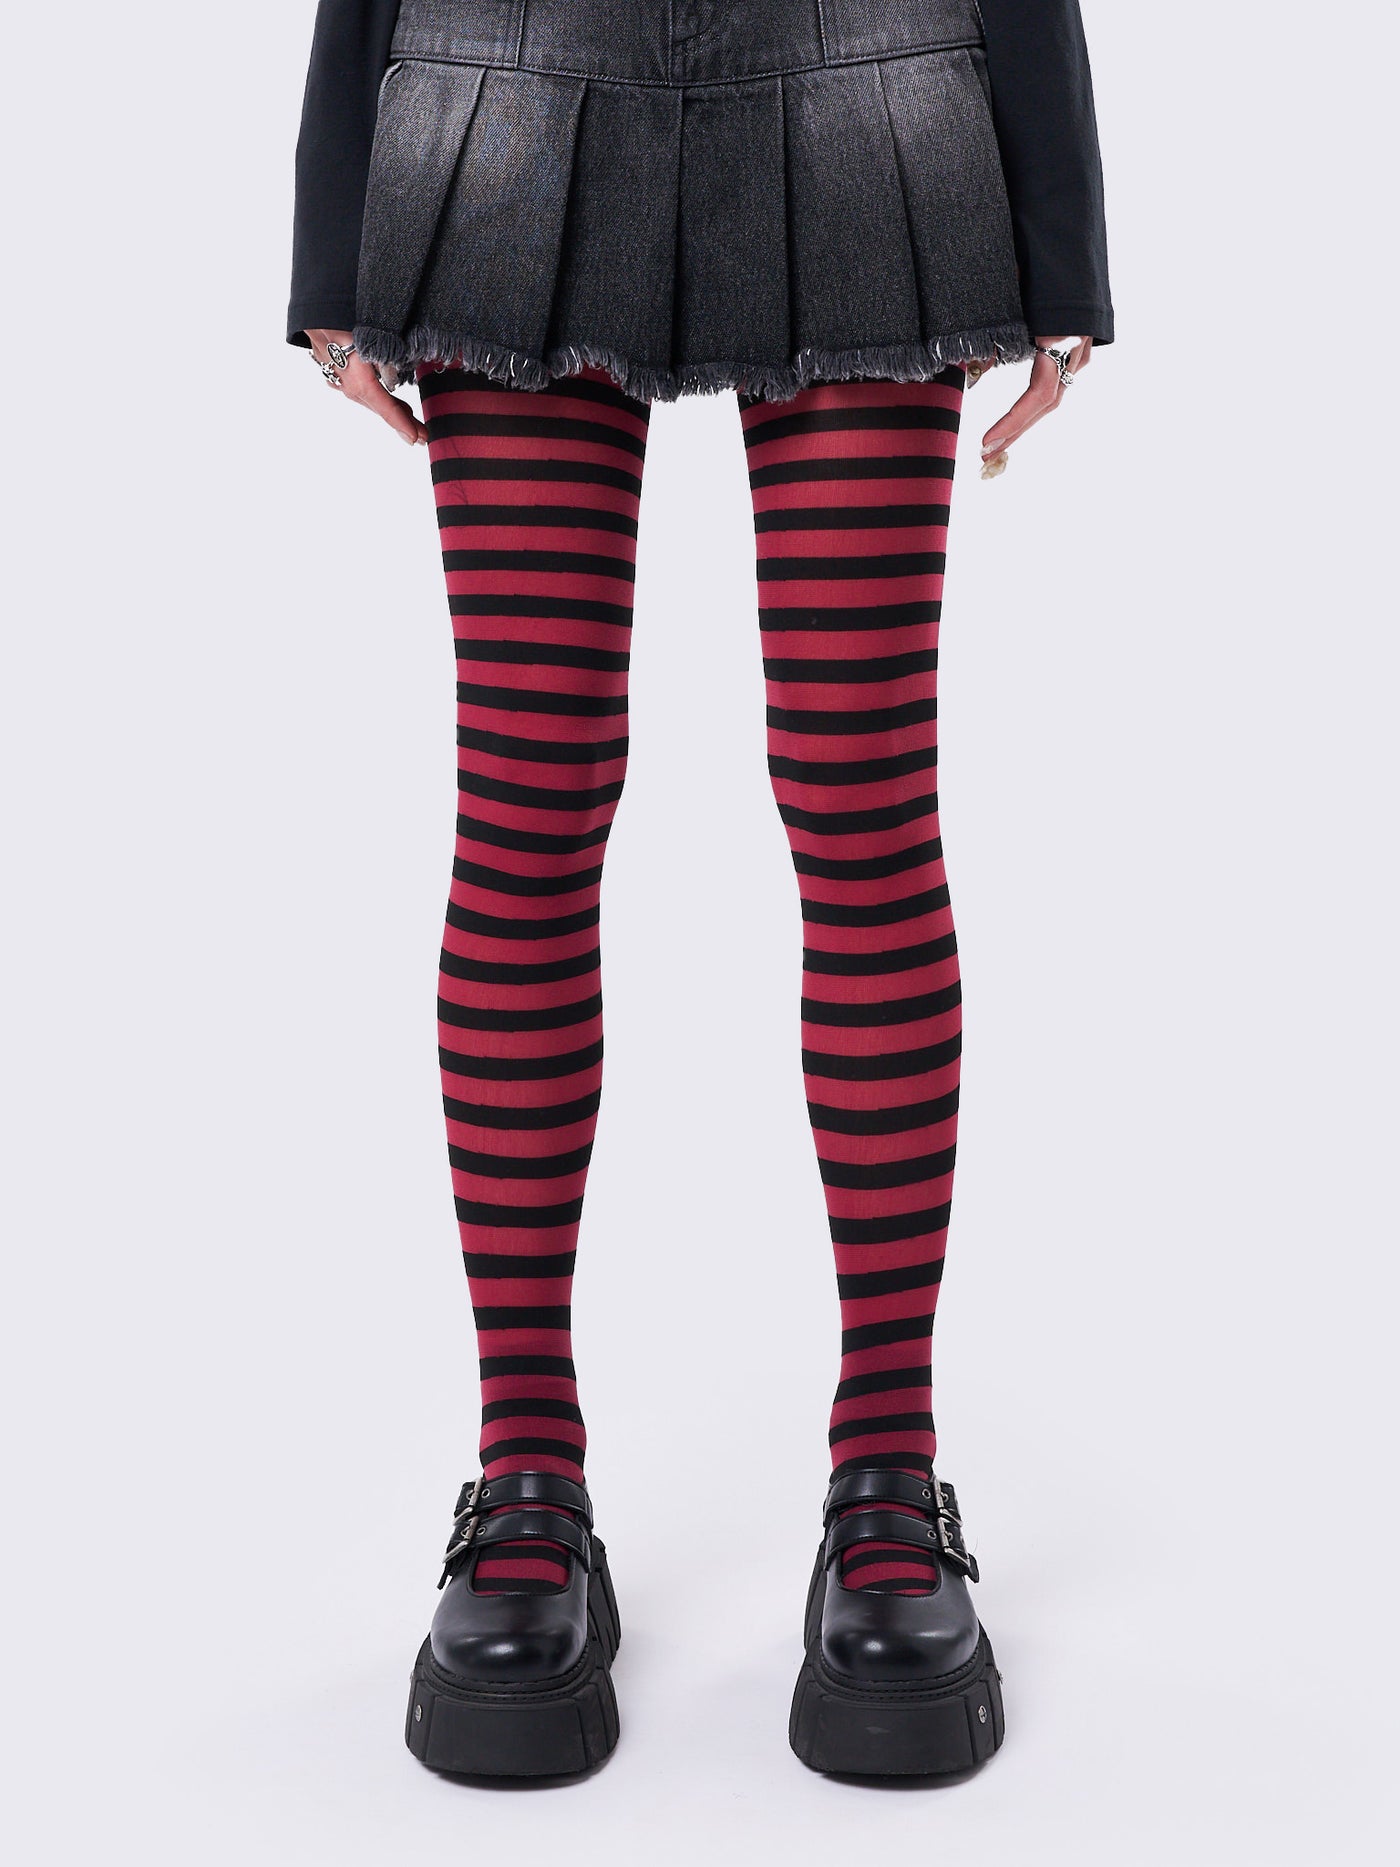 Red and Black Striped Tights